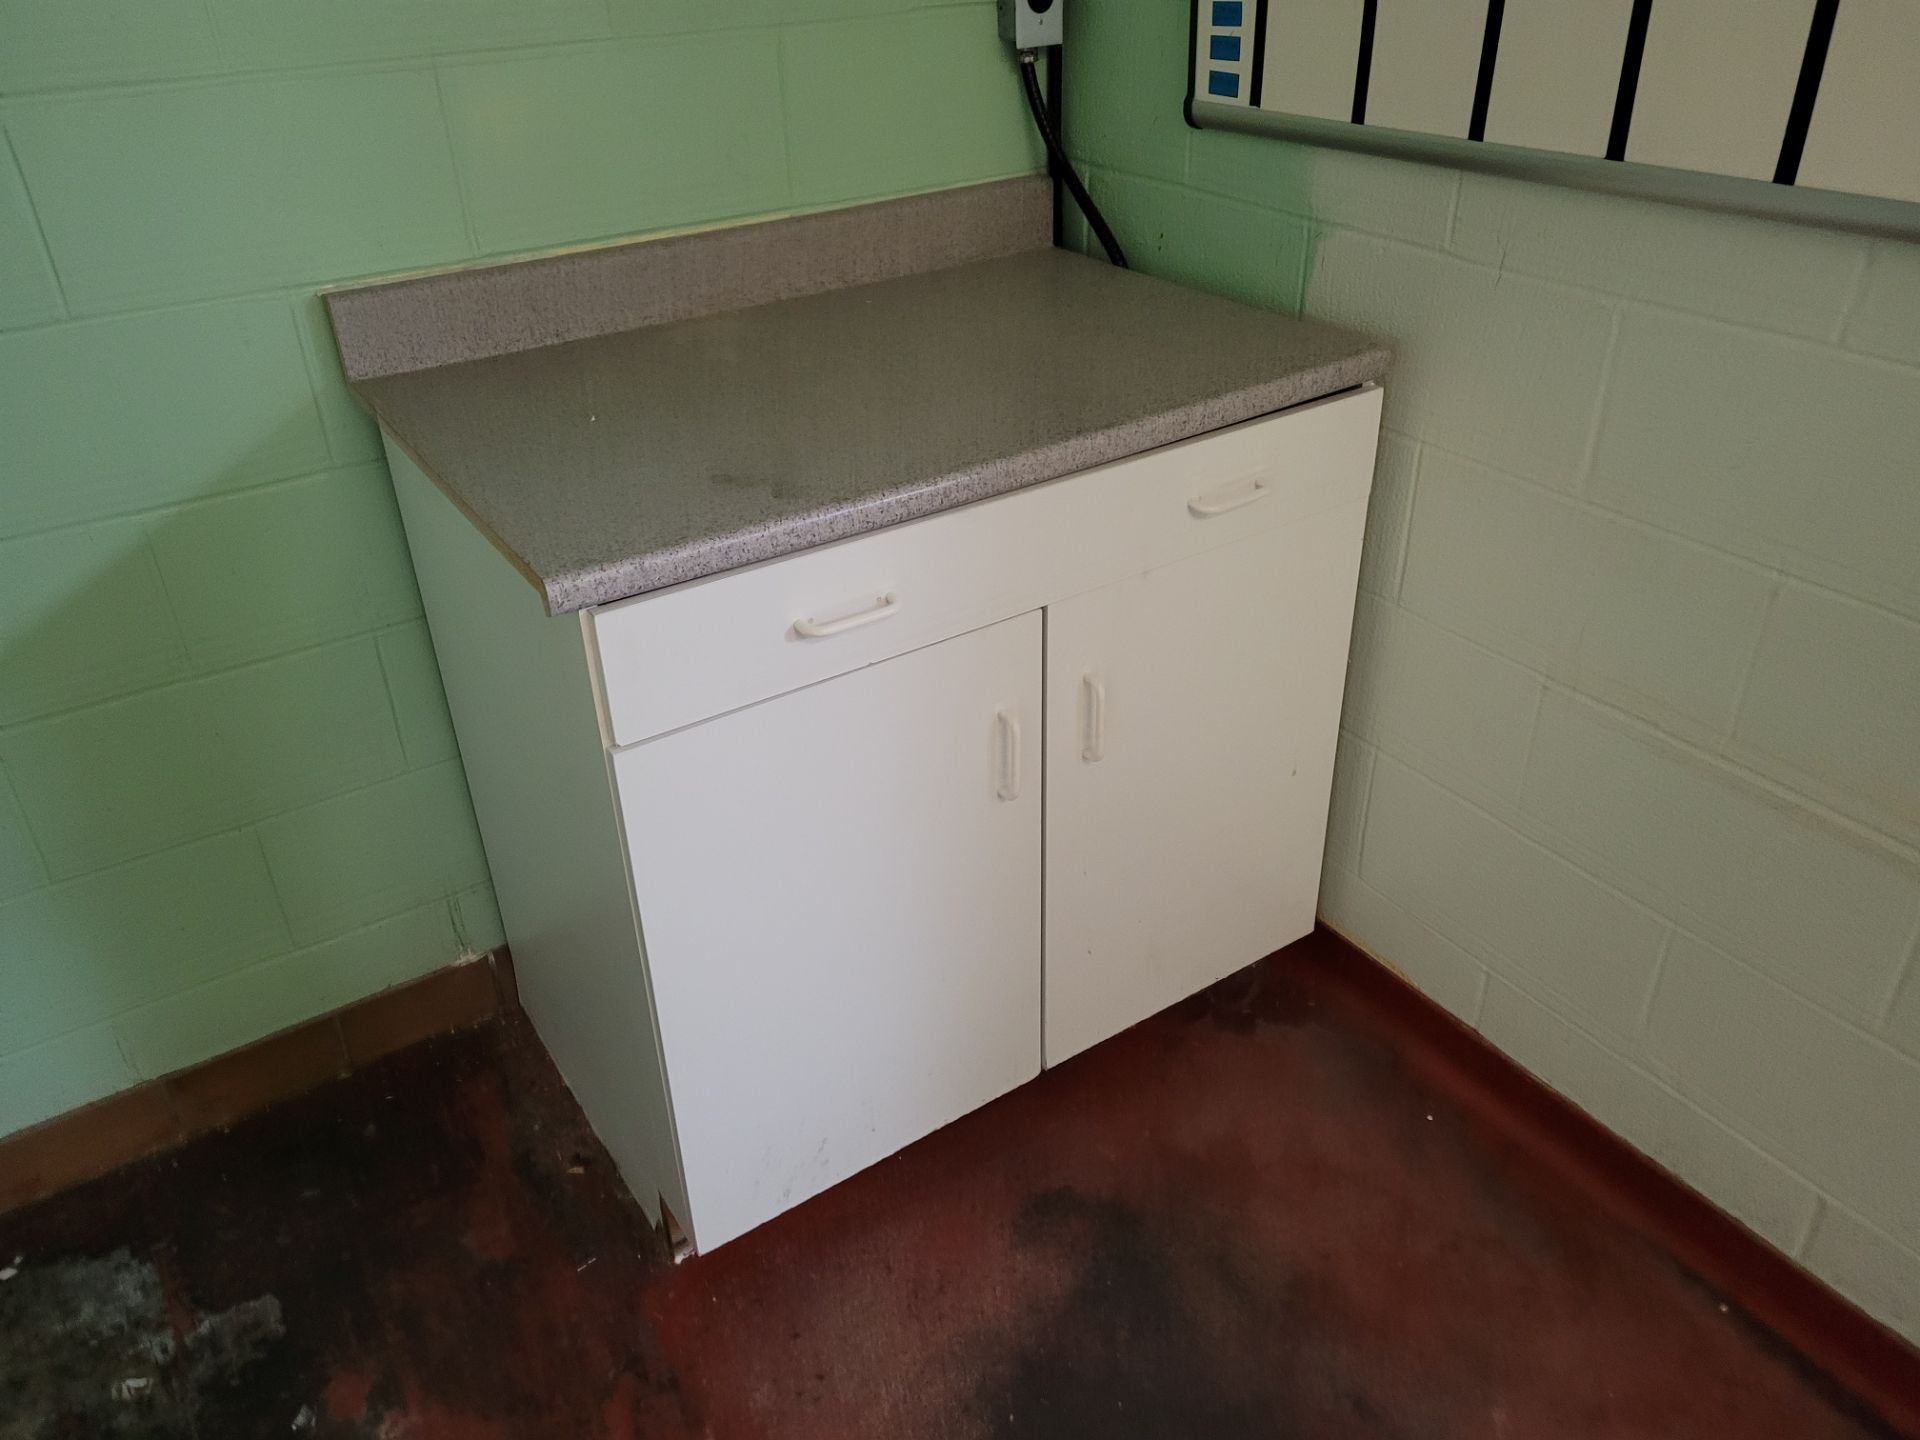 Lot of S/S Sinks and wooden cabinetry in Laboratory Area - Image 5 of 12